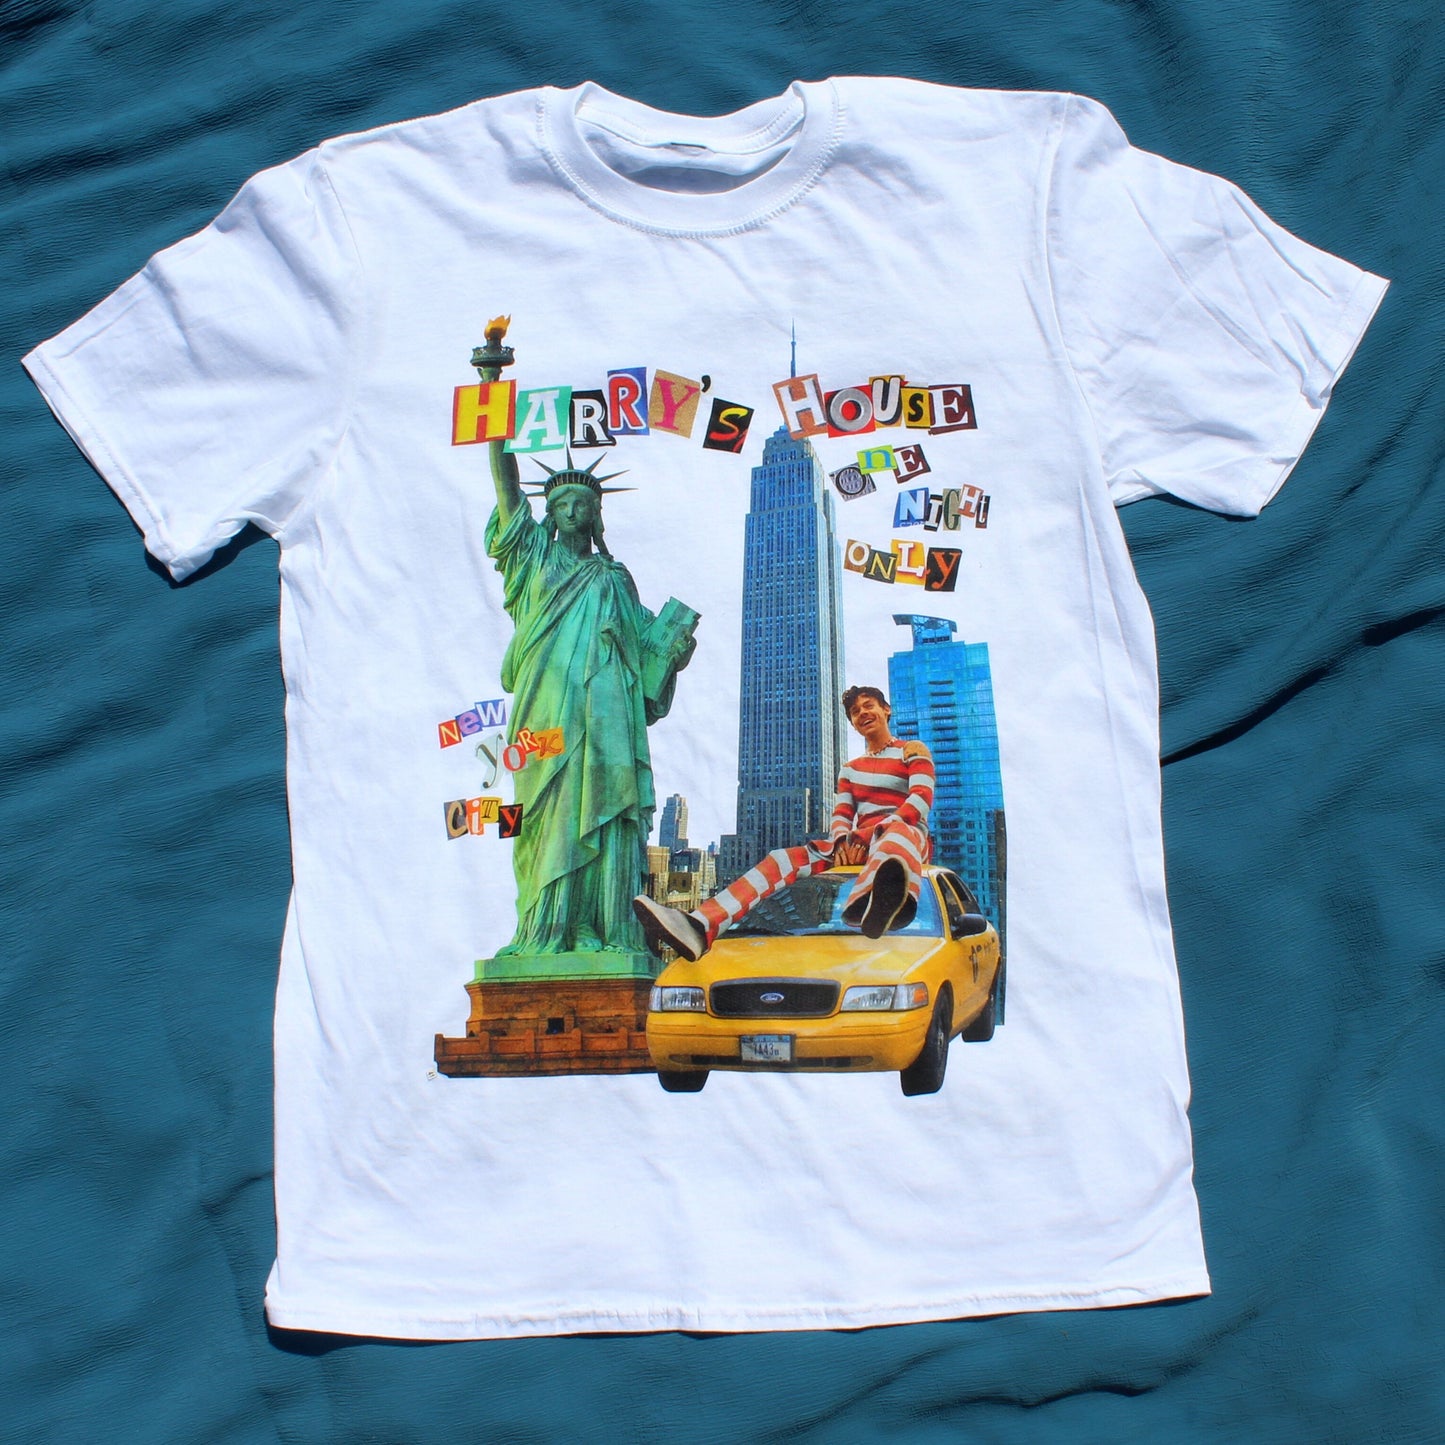 One Night Only New York Tee's